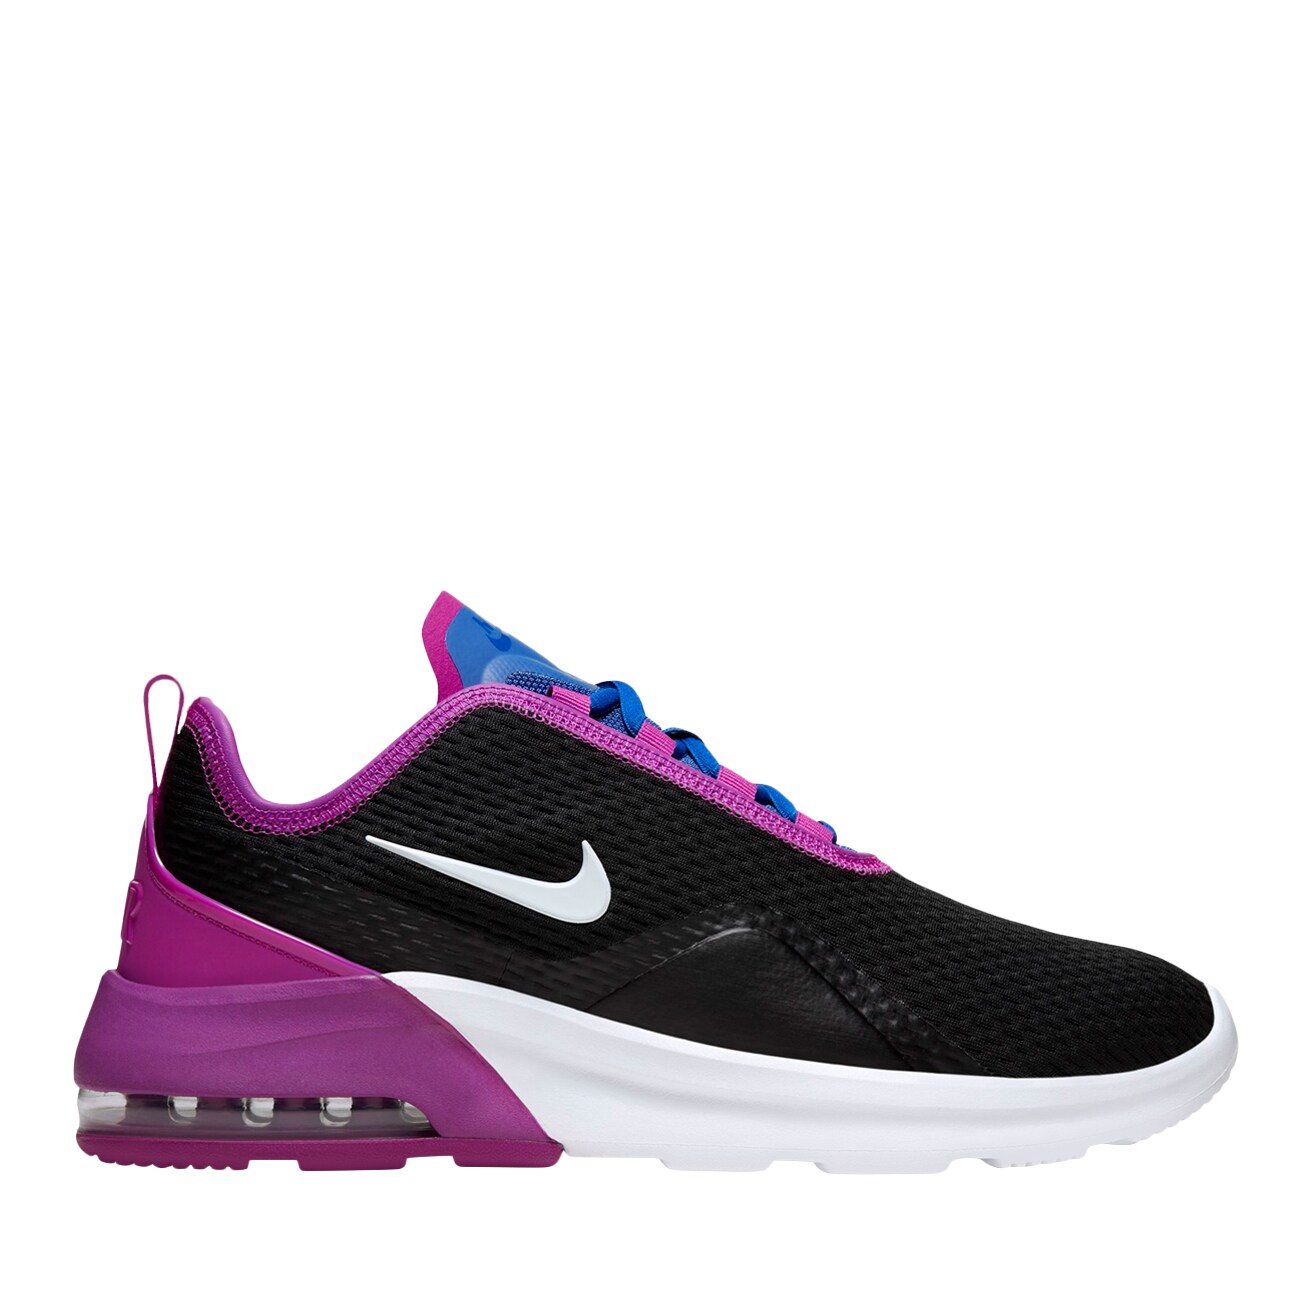 nike air max motion 2 women's sneakers black and white